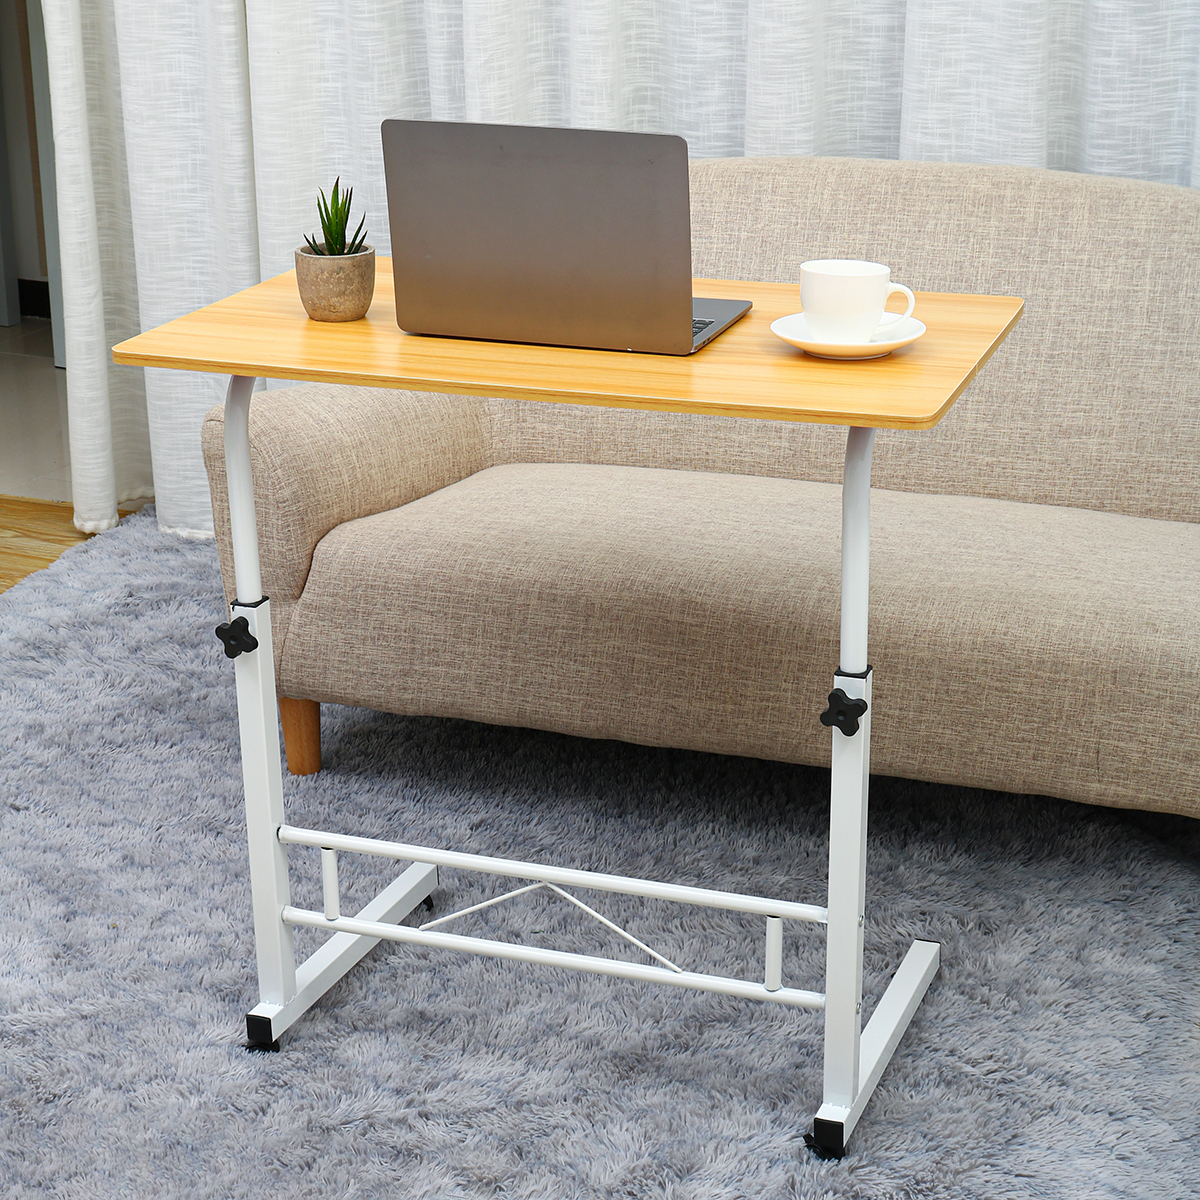 Removable-Laptop-Table-Lifting-Desk-Tabletop-Food-Tray-Bedside-Table-Bed-Sofa-Stand-with-Wheel-1754628-8